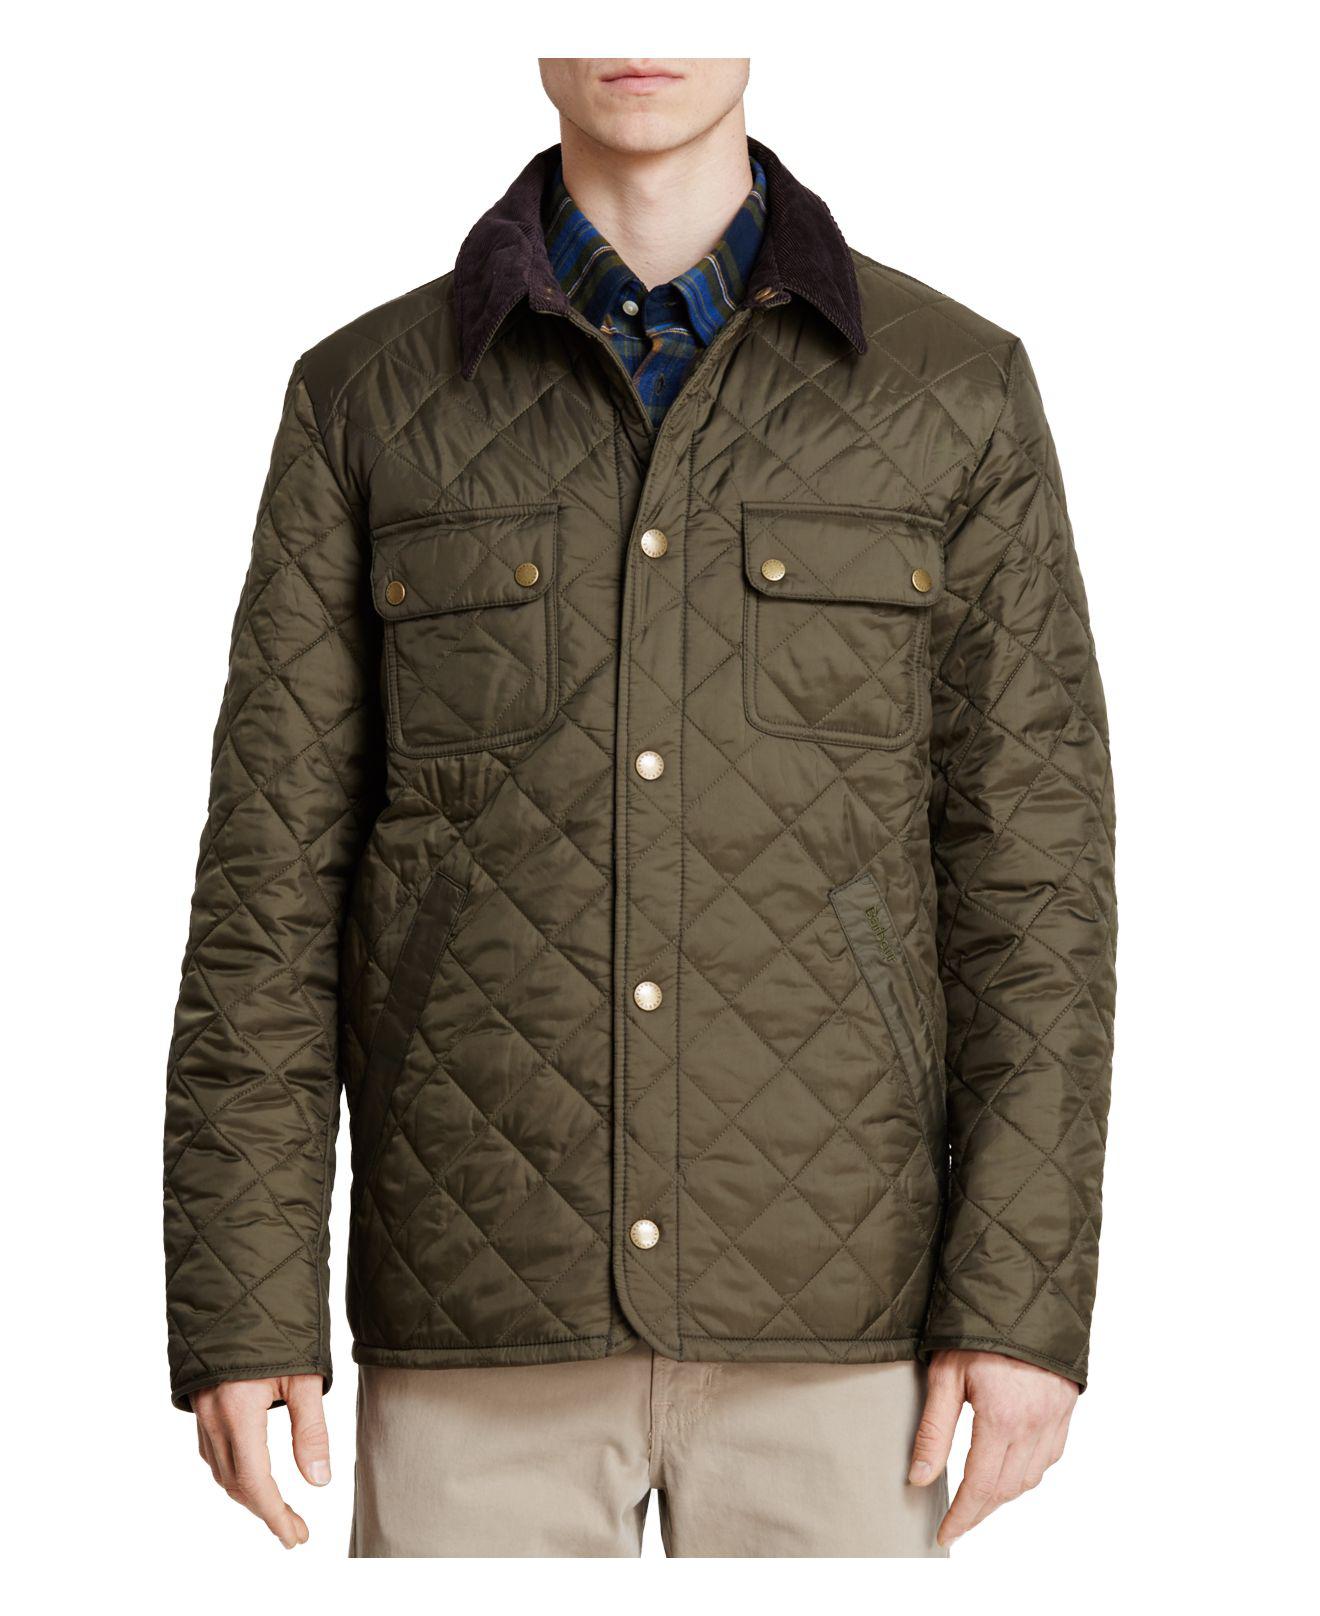 Barbour Corduroy Tinford Quilted Jacket in Olive (Green) for Men - Lyst